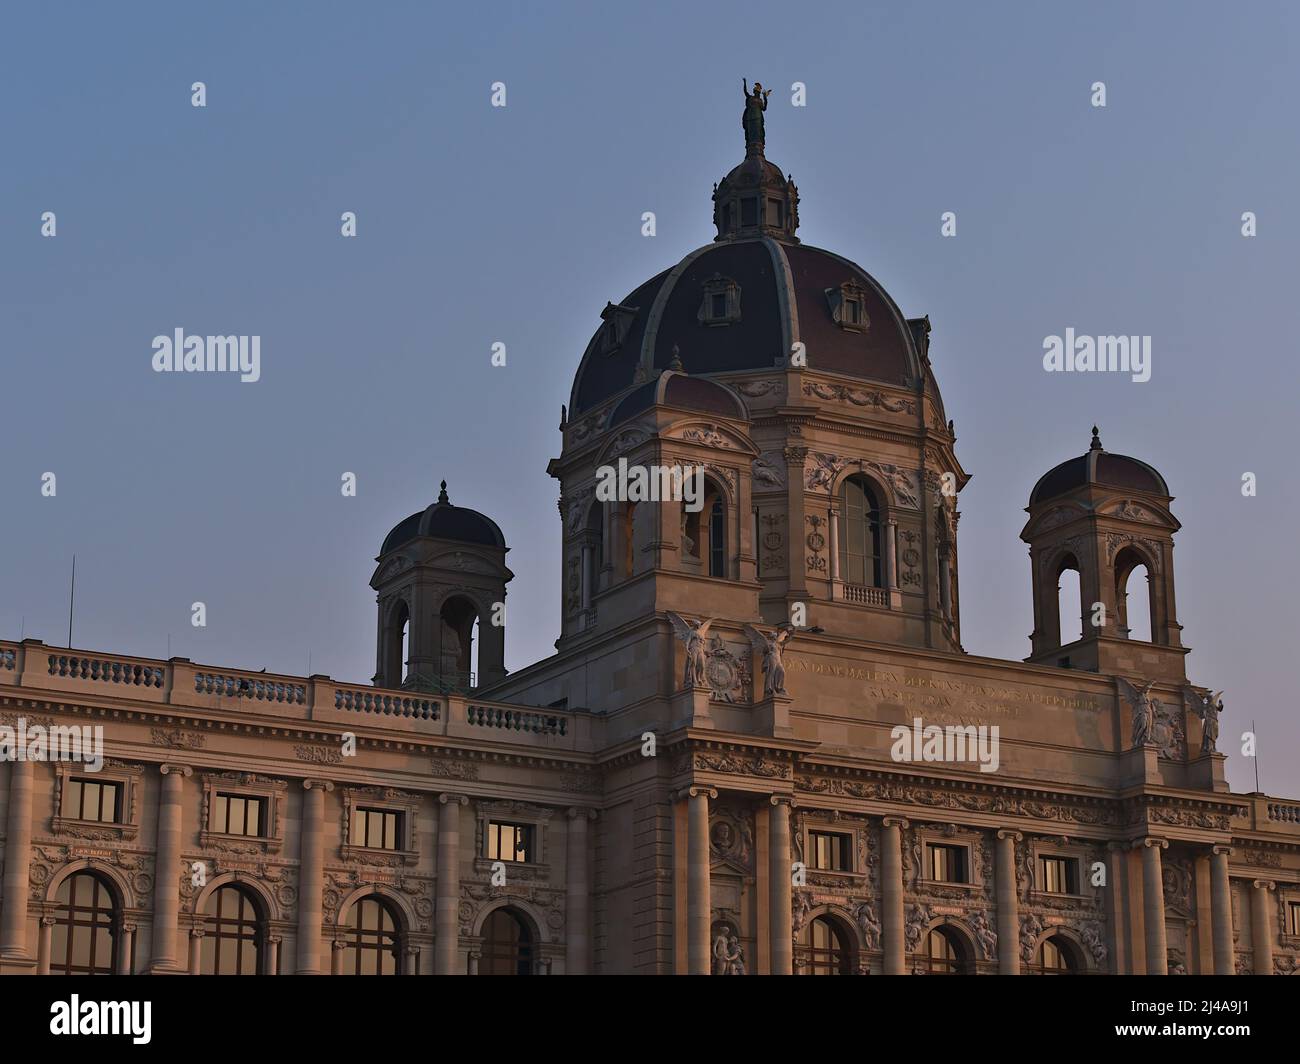 Closeup view of the top of the building of Kunsthistorisches Museum (Museum of Art History) in the historic center of Vienna, capital of Austria. Stock Photo